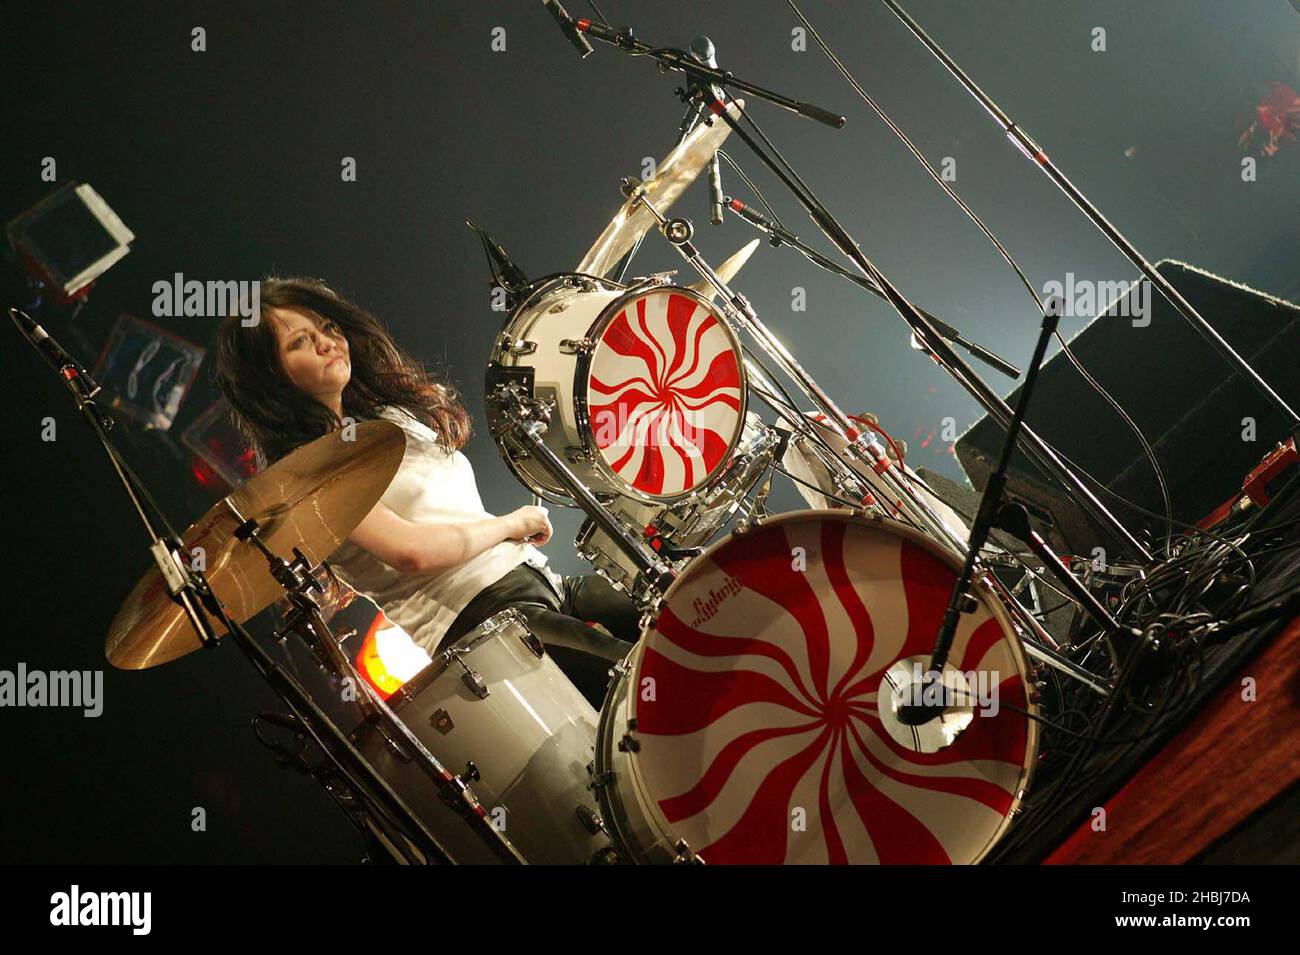 The White Stripes (Meg and Jack White)perform on stage at Carling Brixton Academy, London. (Meg WHite on Drums) Stock Photo